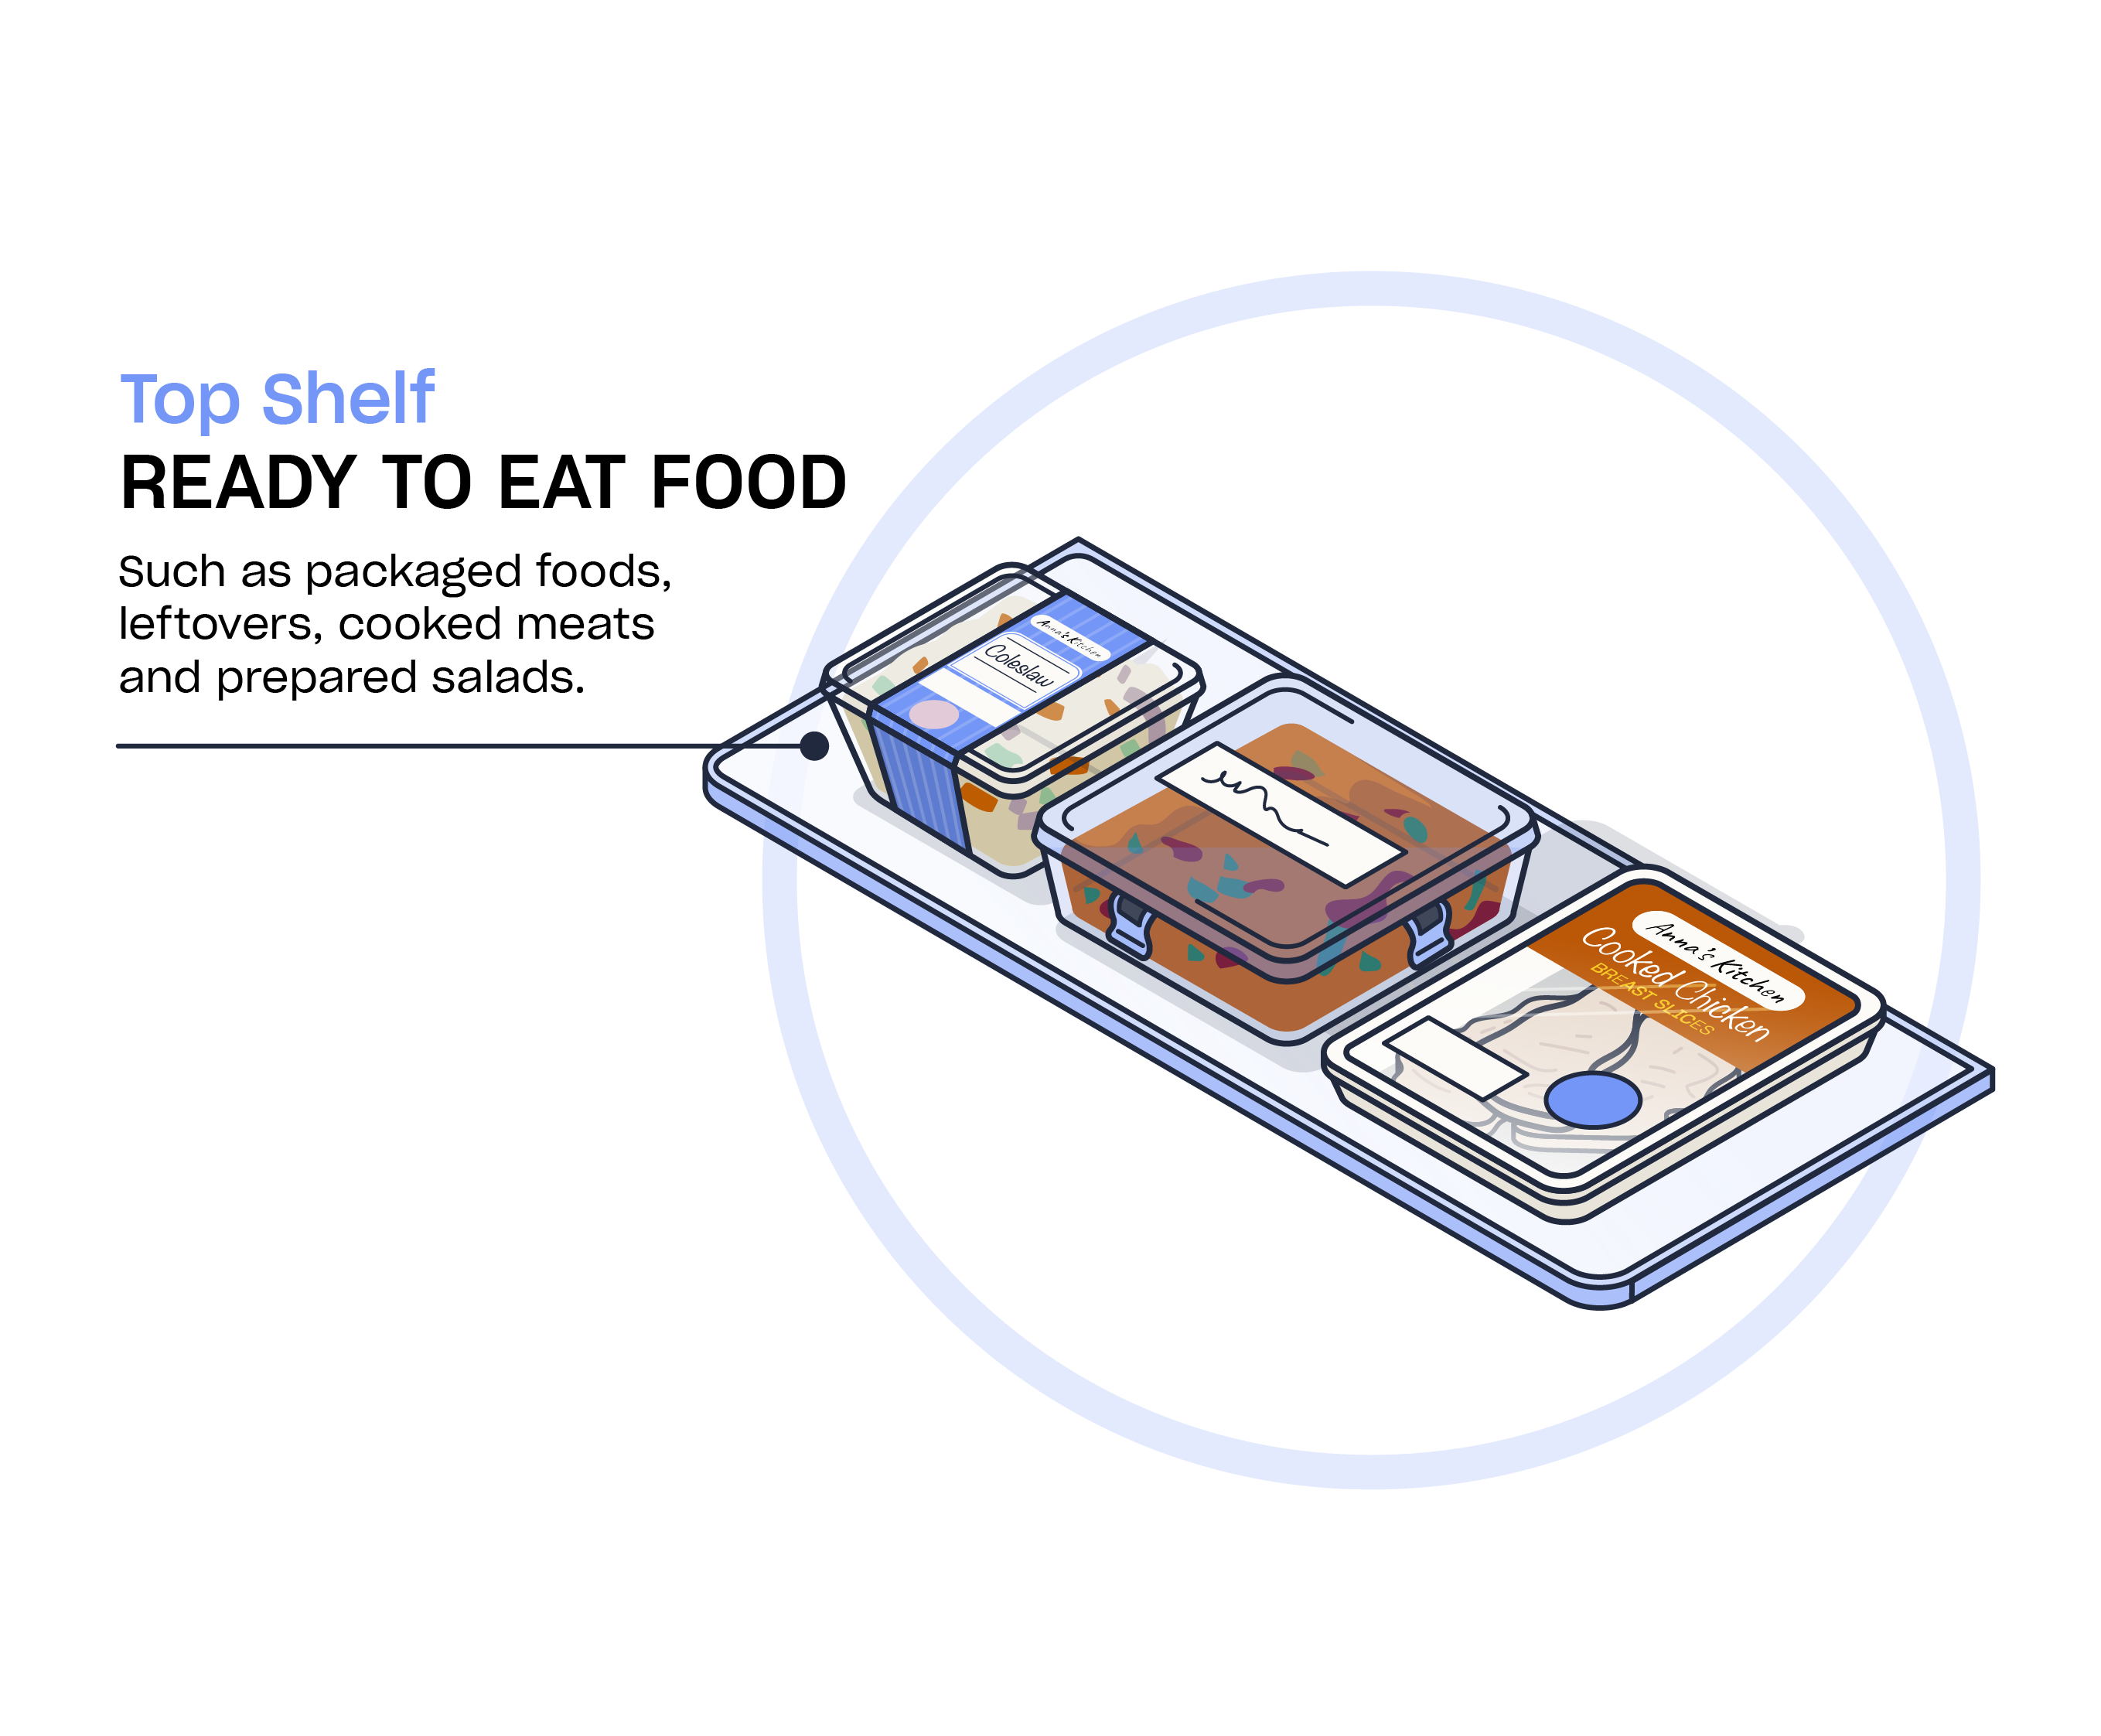 Containing food safety with the right containers: Part 1 - Safe